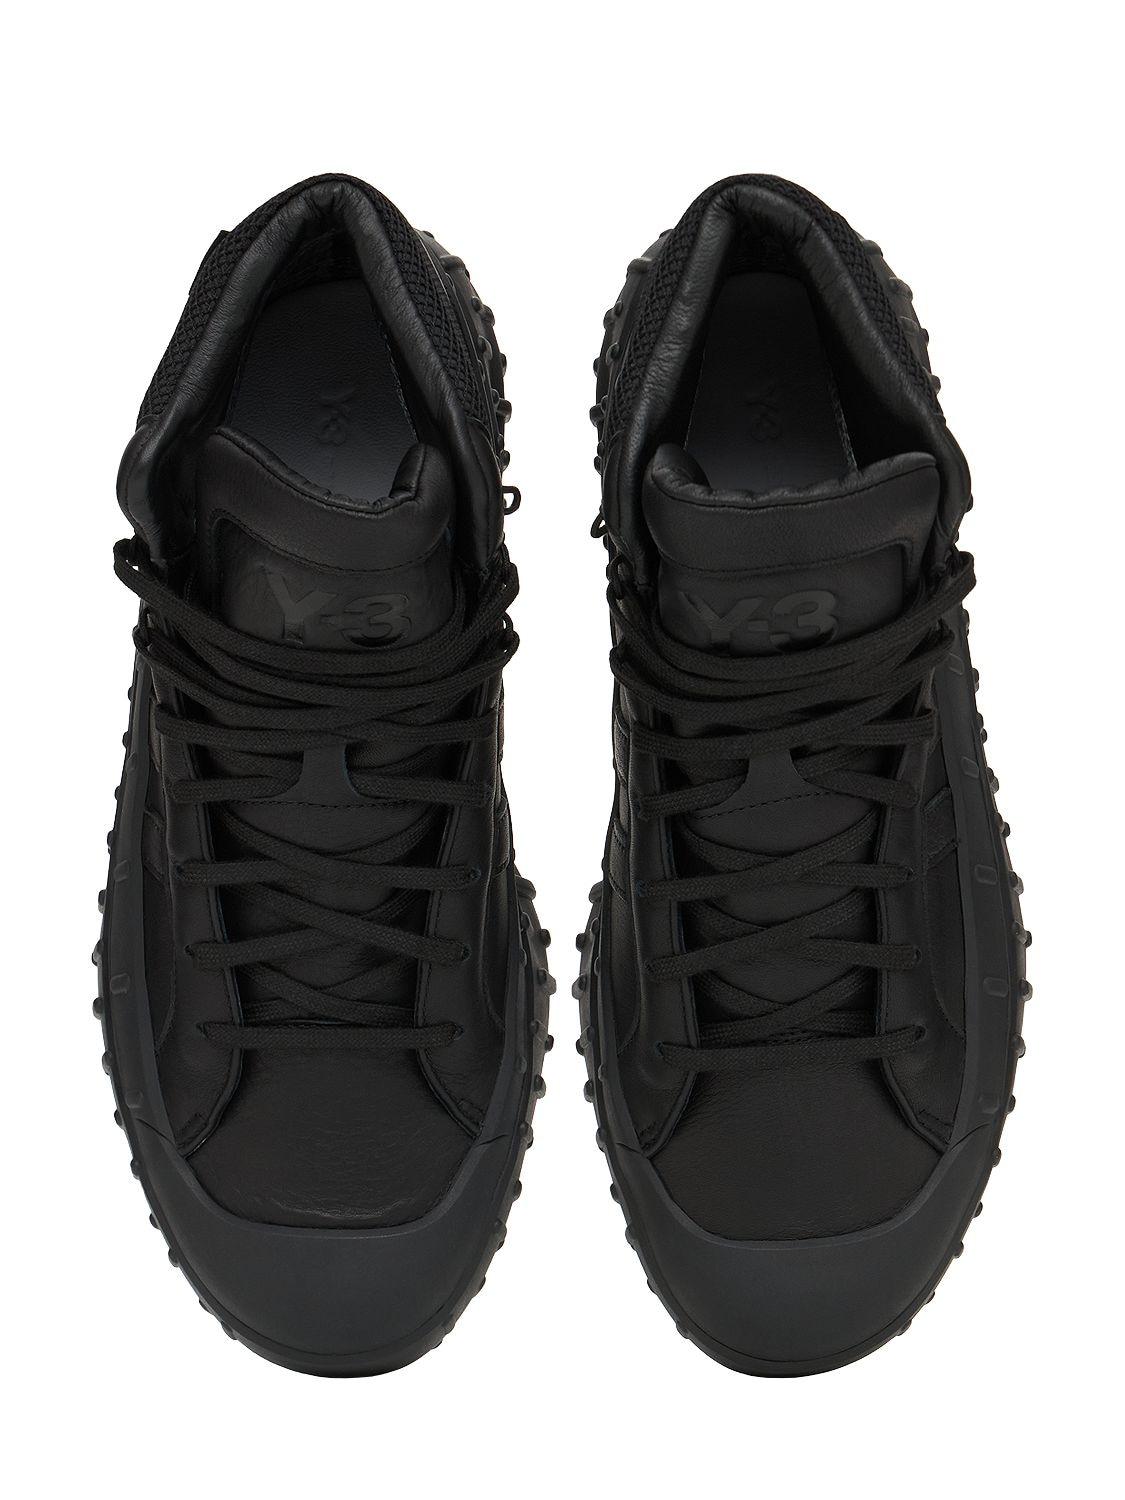 Y-3 Gr.1p High Gtx Leather & Tech Sneakers in Black for Men | Lyst